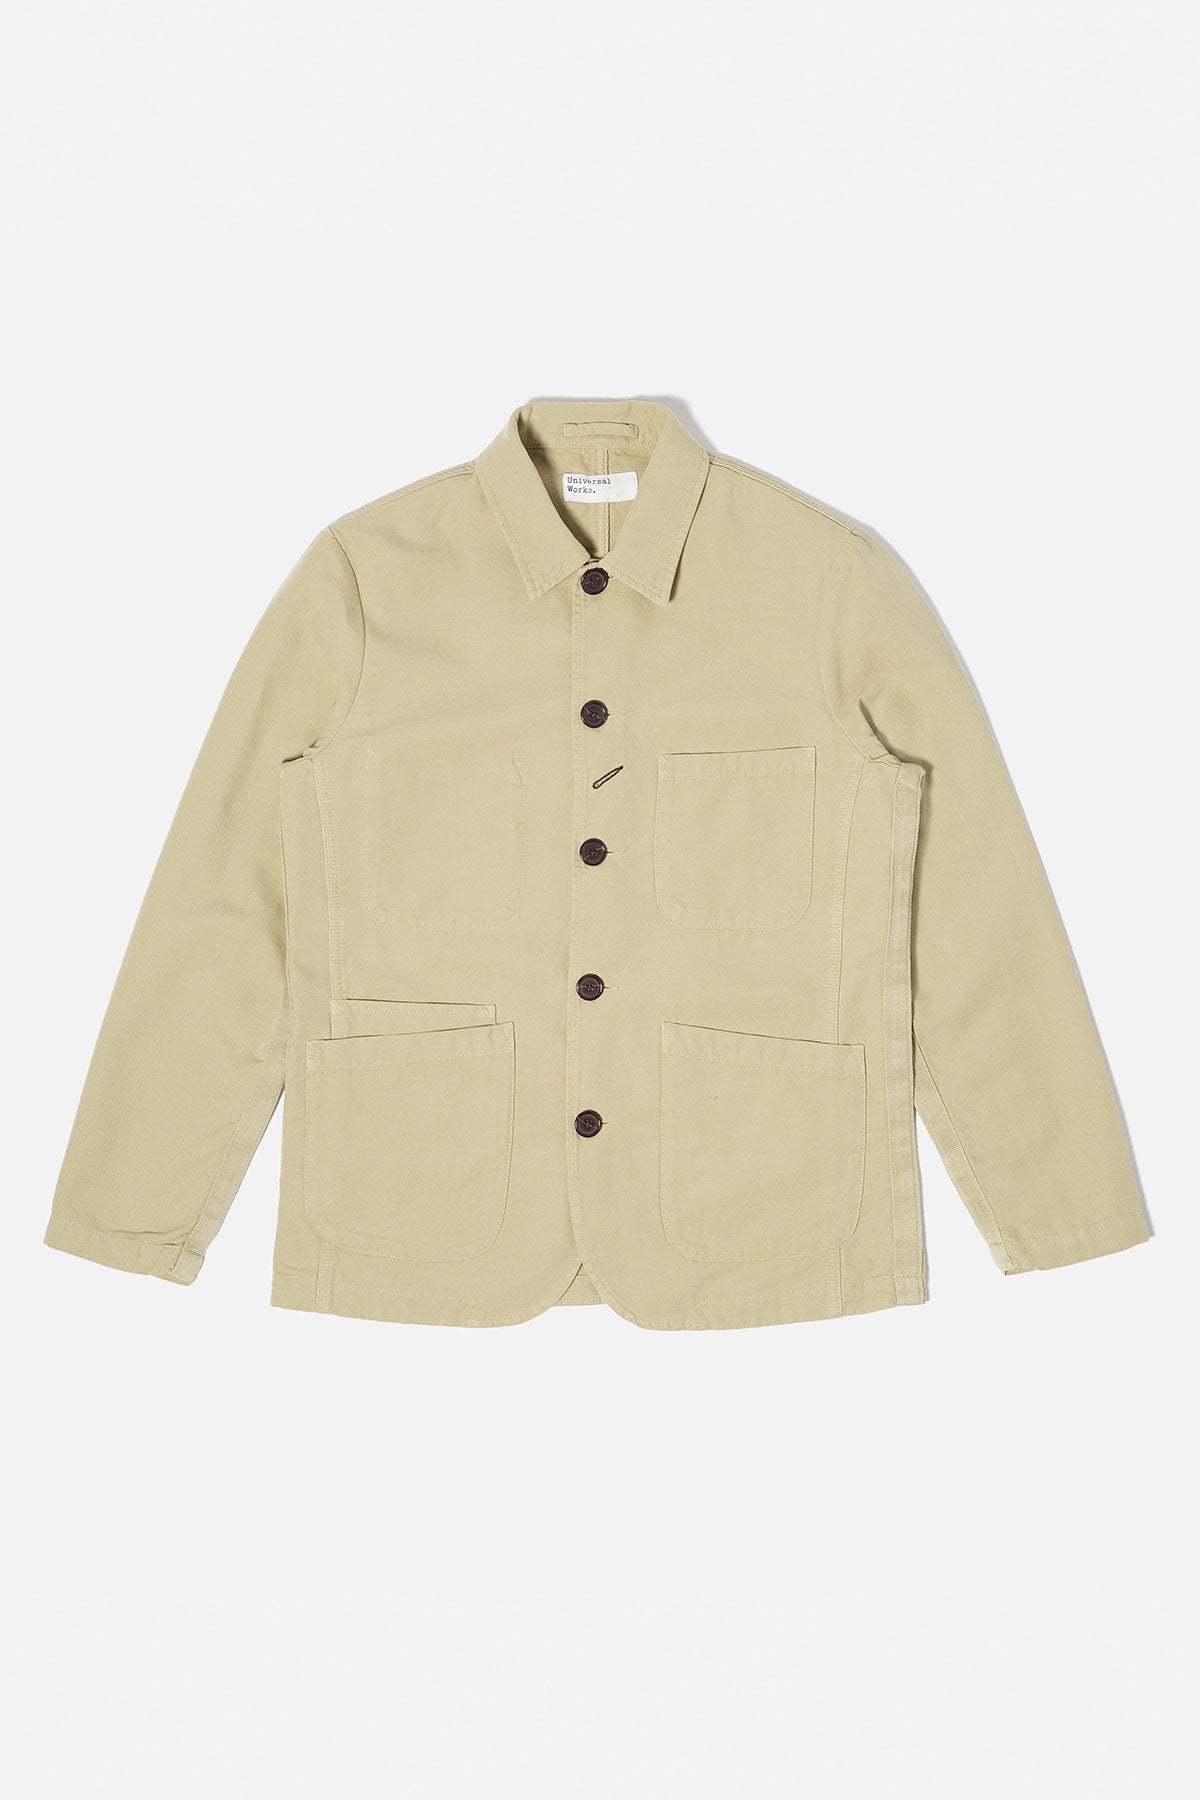 Universal Works Bakers Jacket In Sand Canvas